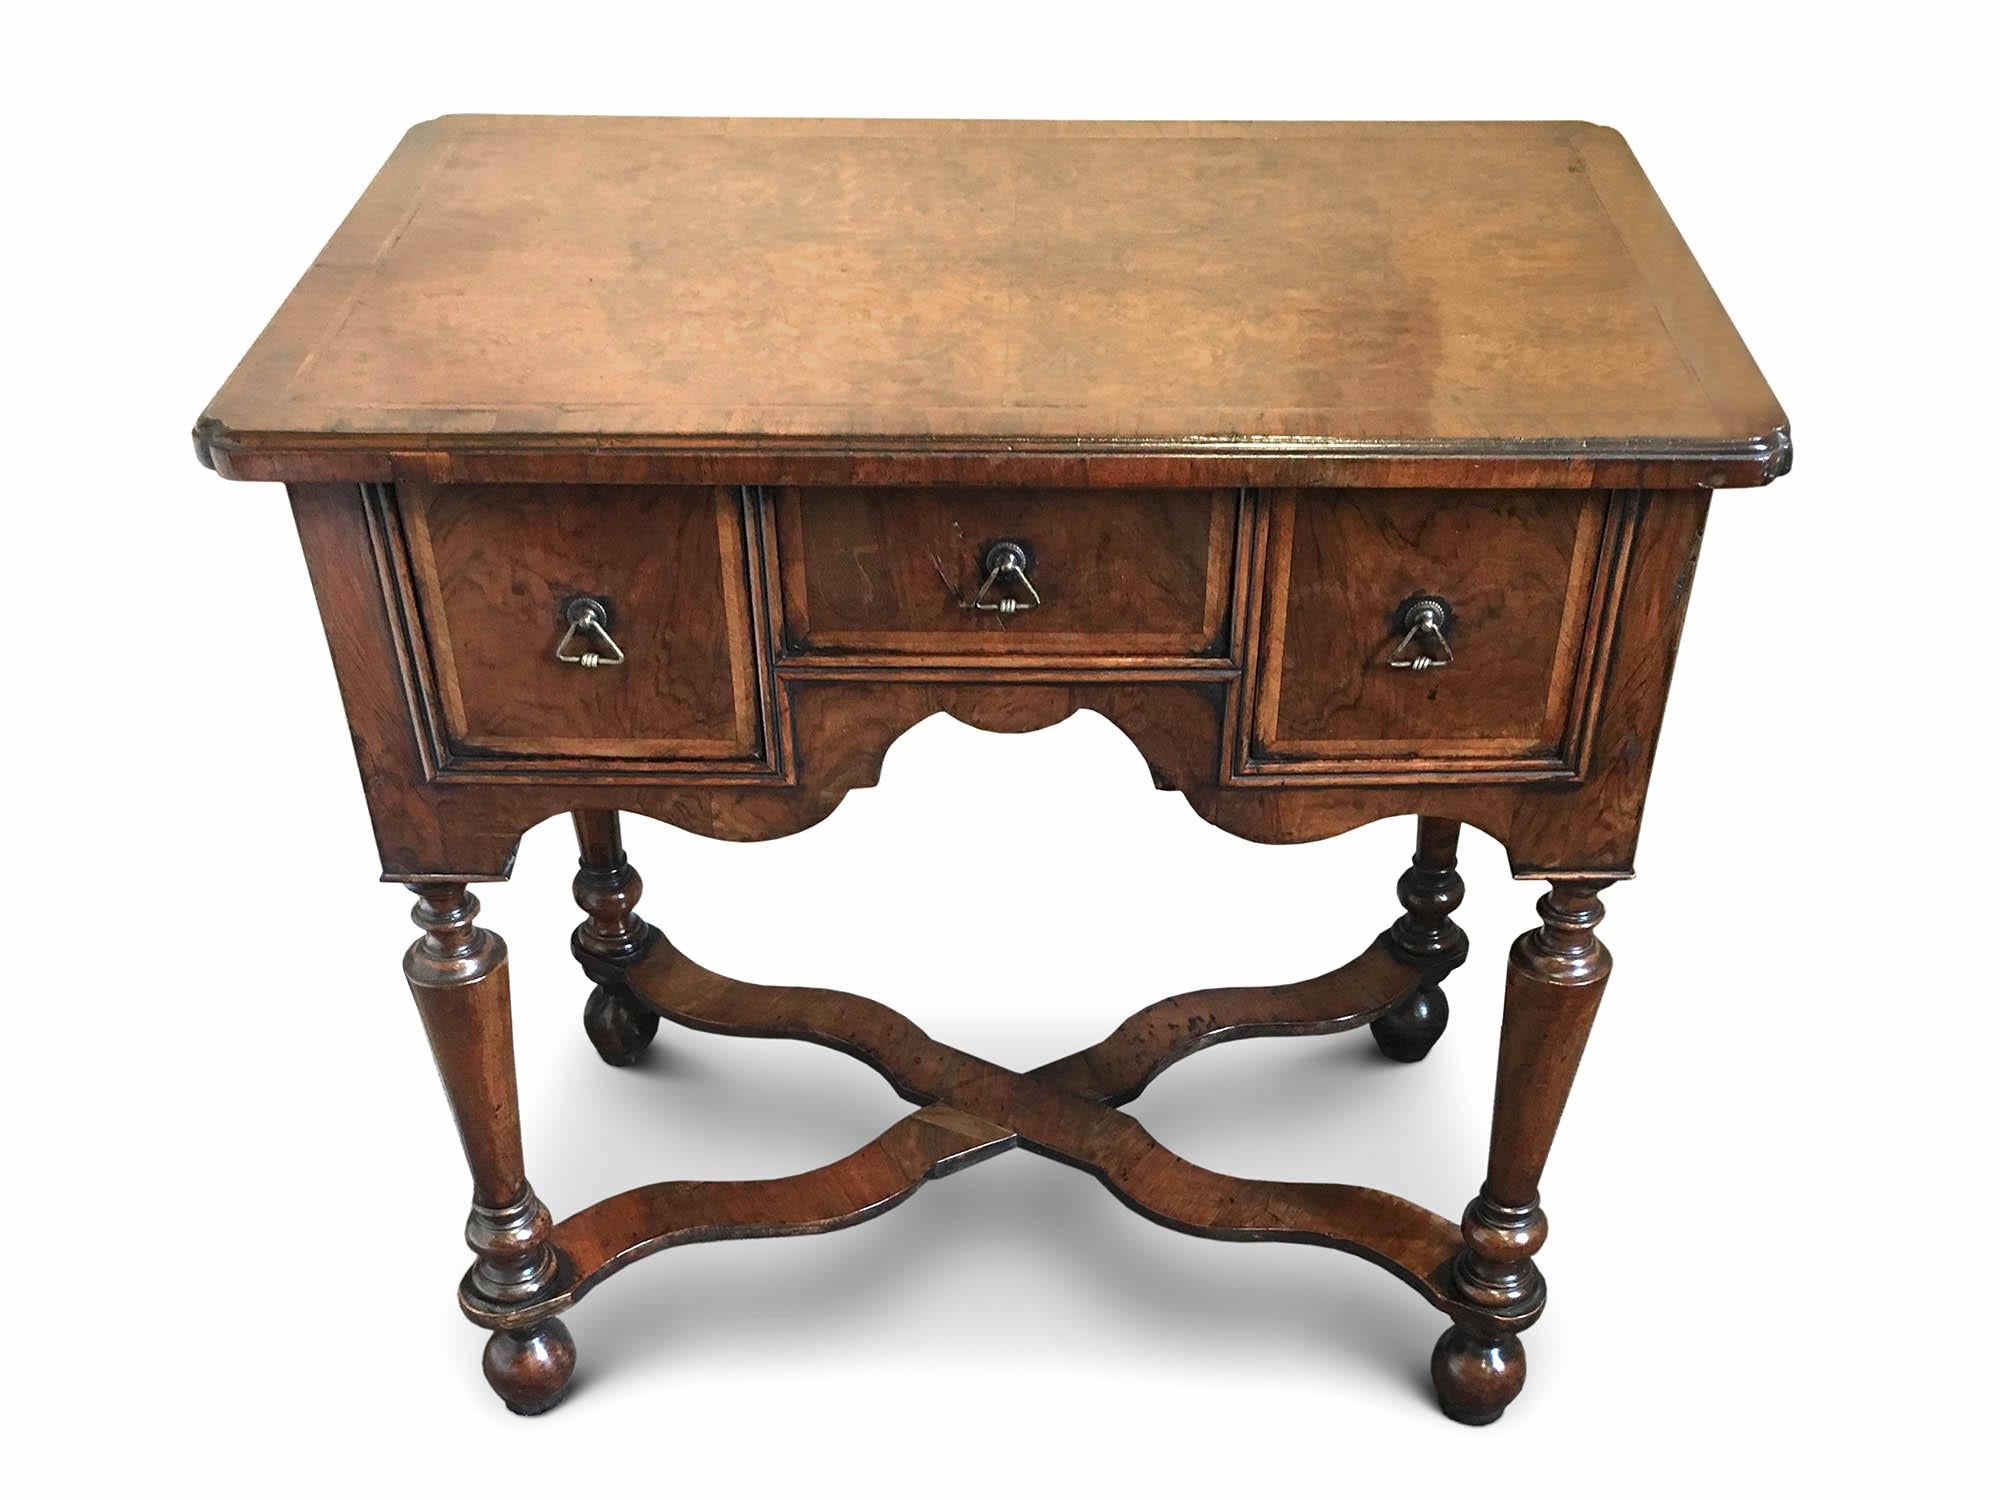 A William & Mary Walnut Lowboy, circa 1700 & later.
The top with cross banding and rounded corners, with three drawers, carved apron resting on four turned tapering legs joined by an X stretcher.

This item has been fully restored.